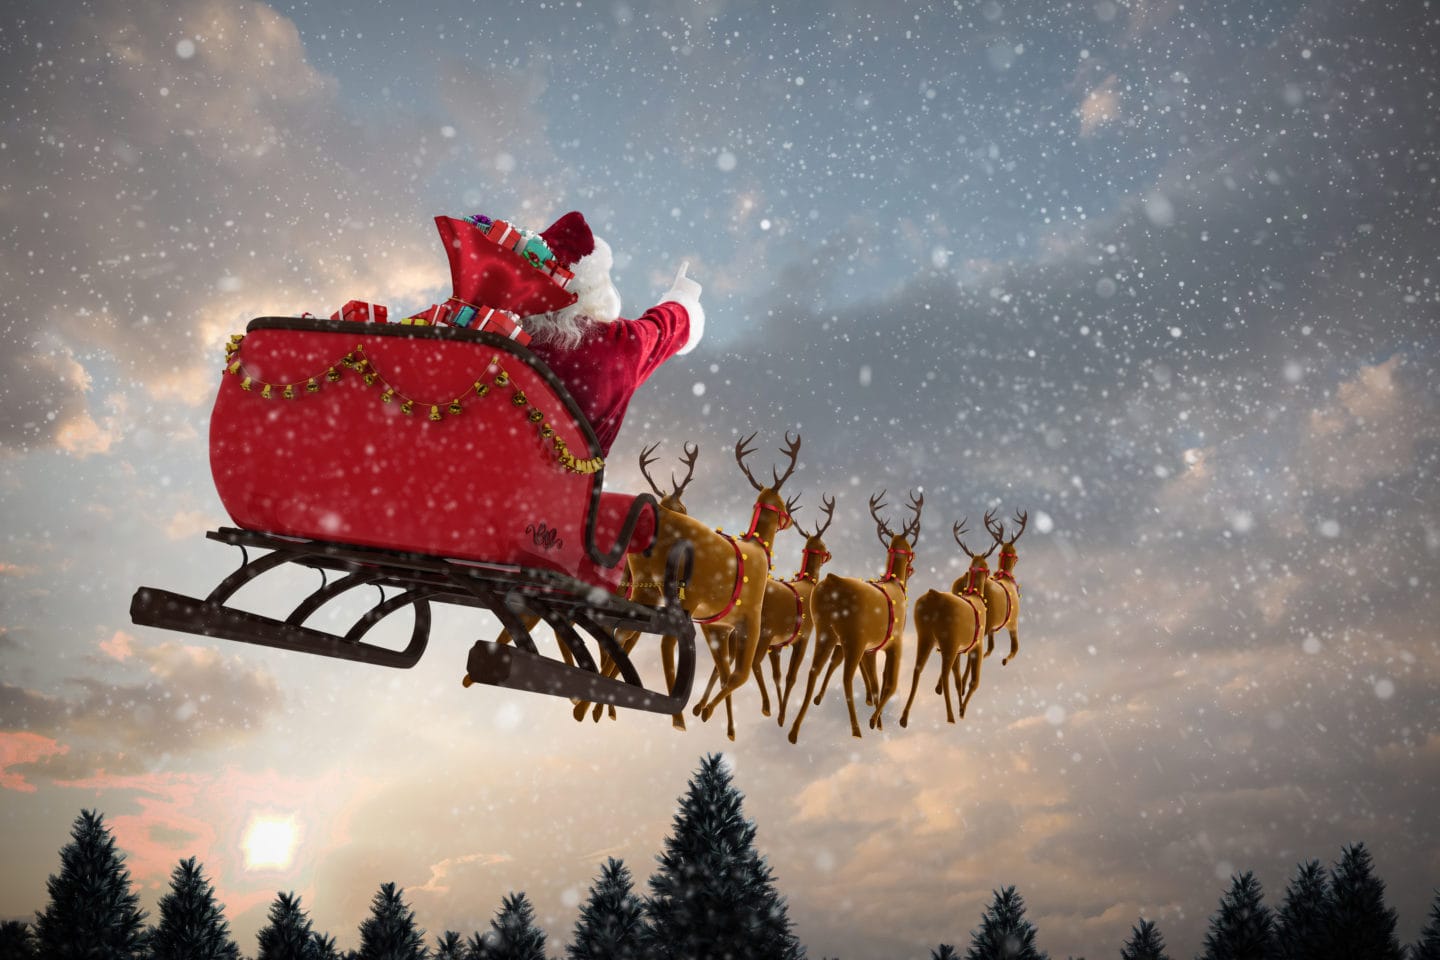 Claim survey found that one in four want a different gender Santa Claus is Half True 3